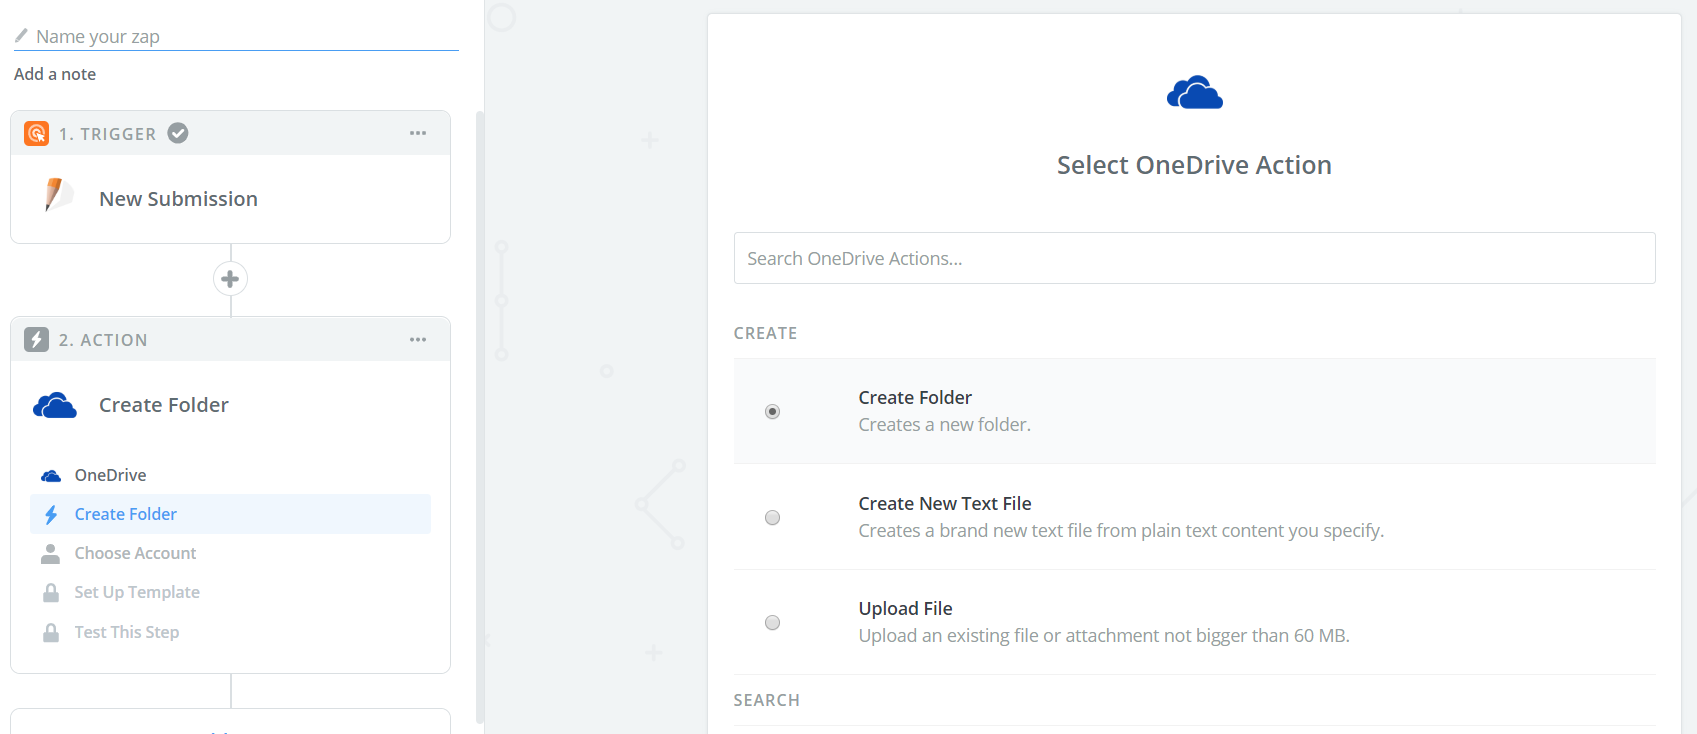 How to save all of the form data as a file on OneDrive for Business? Image 1 Screenshot 20